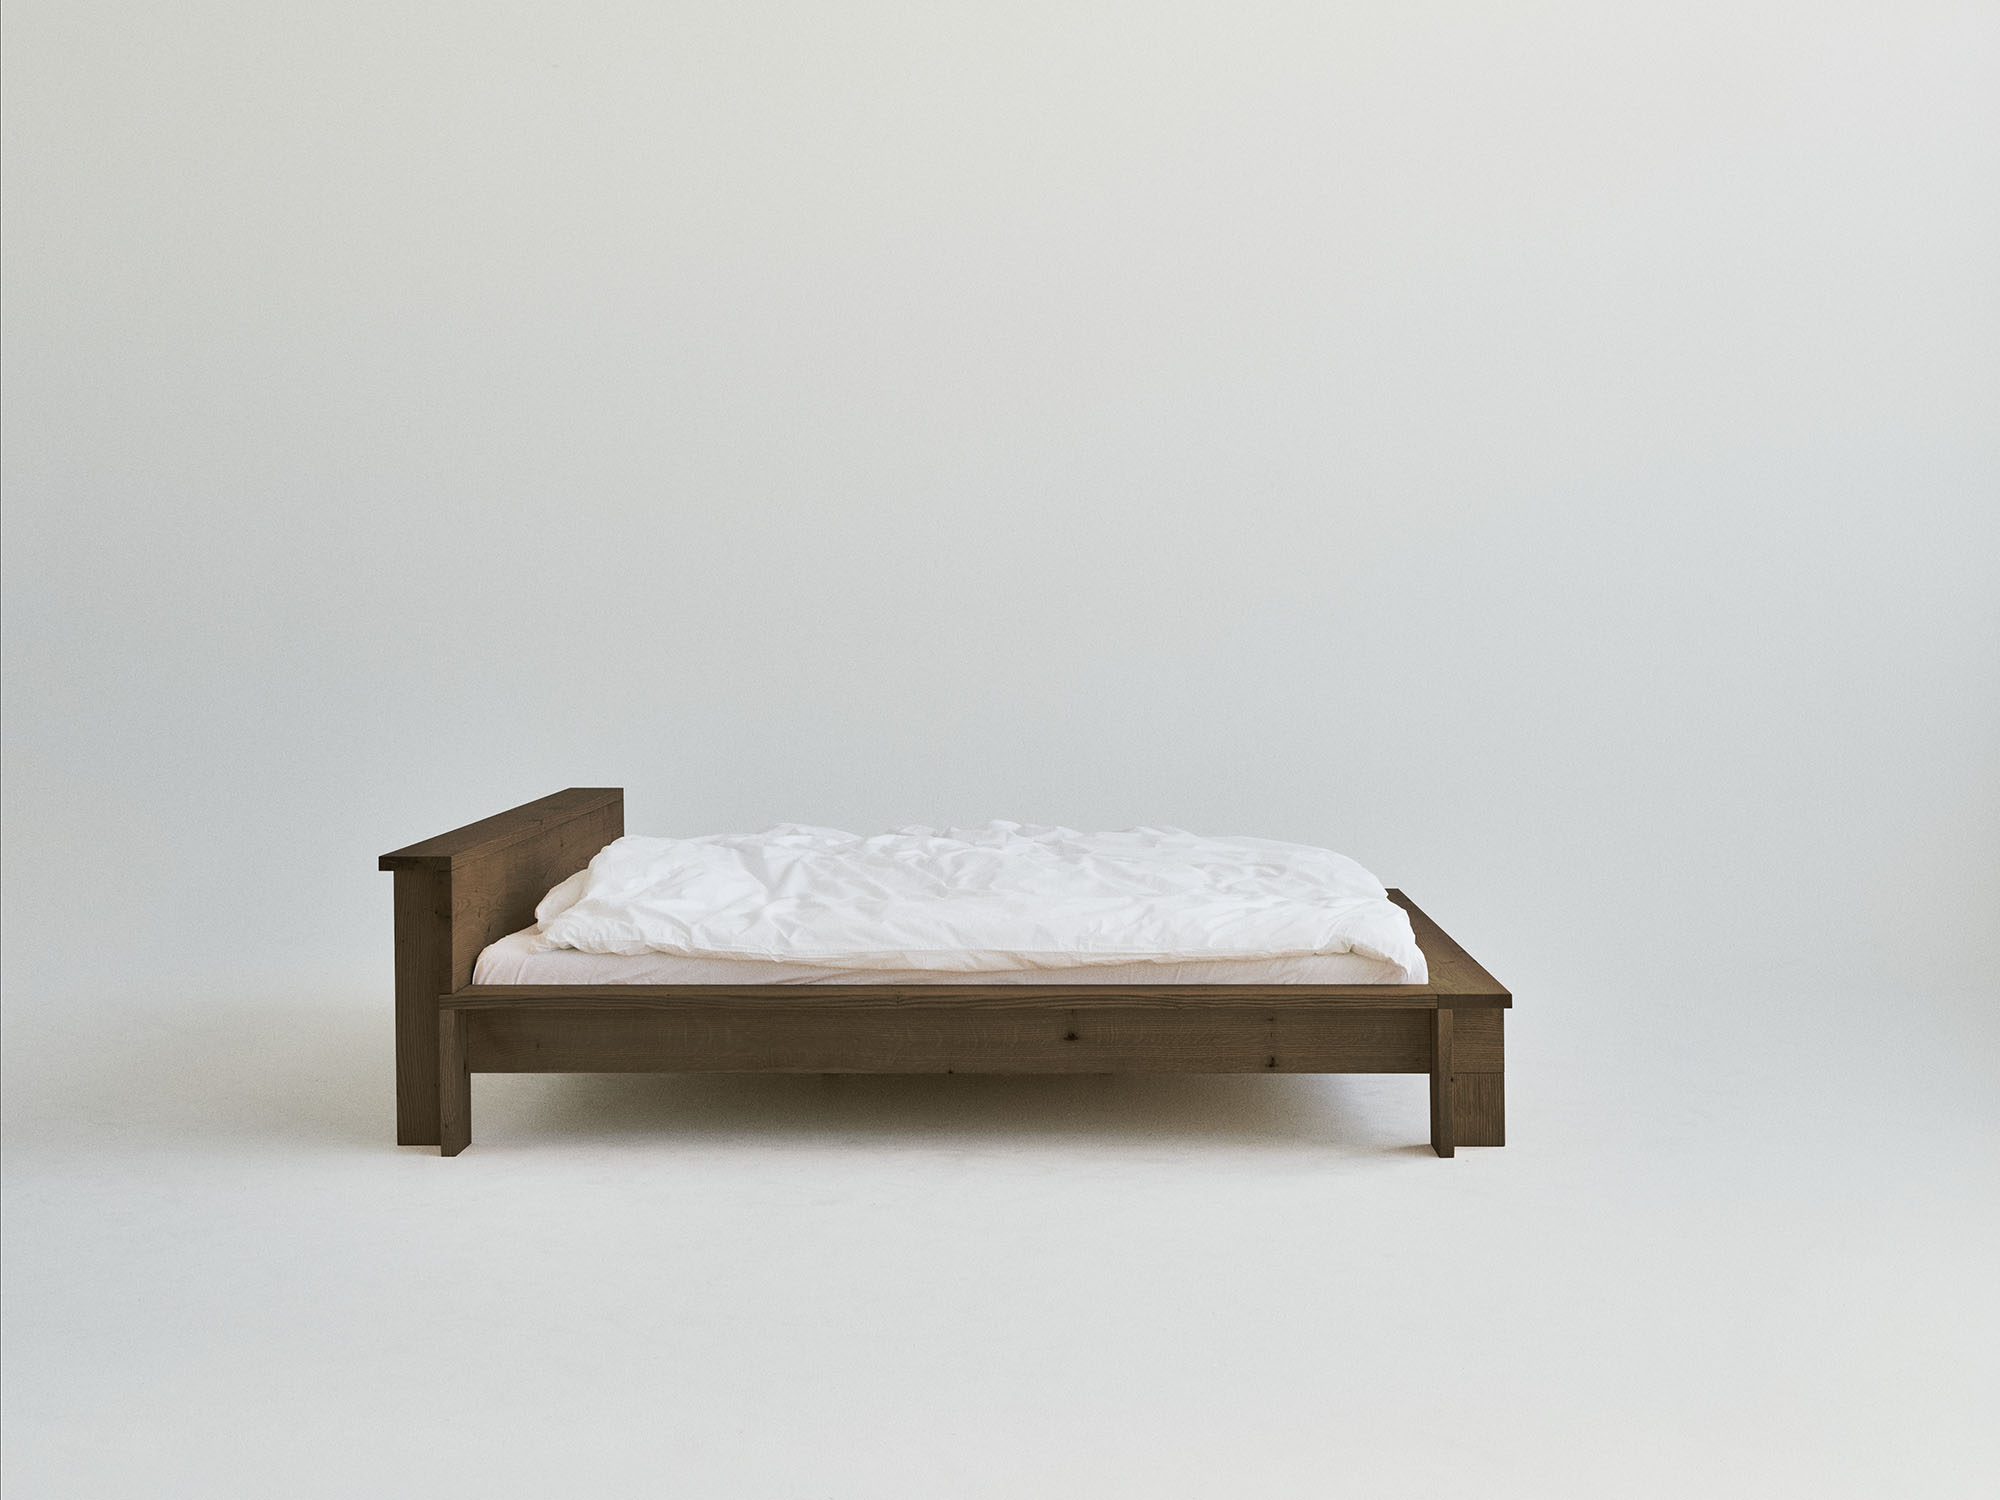 RYE Hem bed frame in smoked solid red oak - side view pack shot